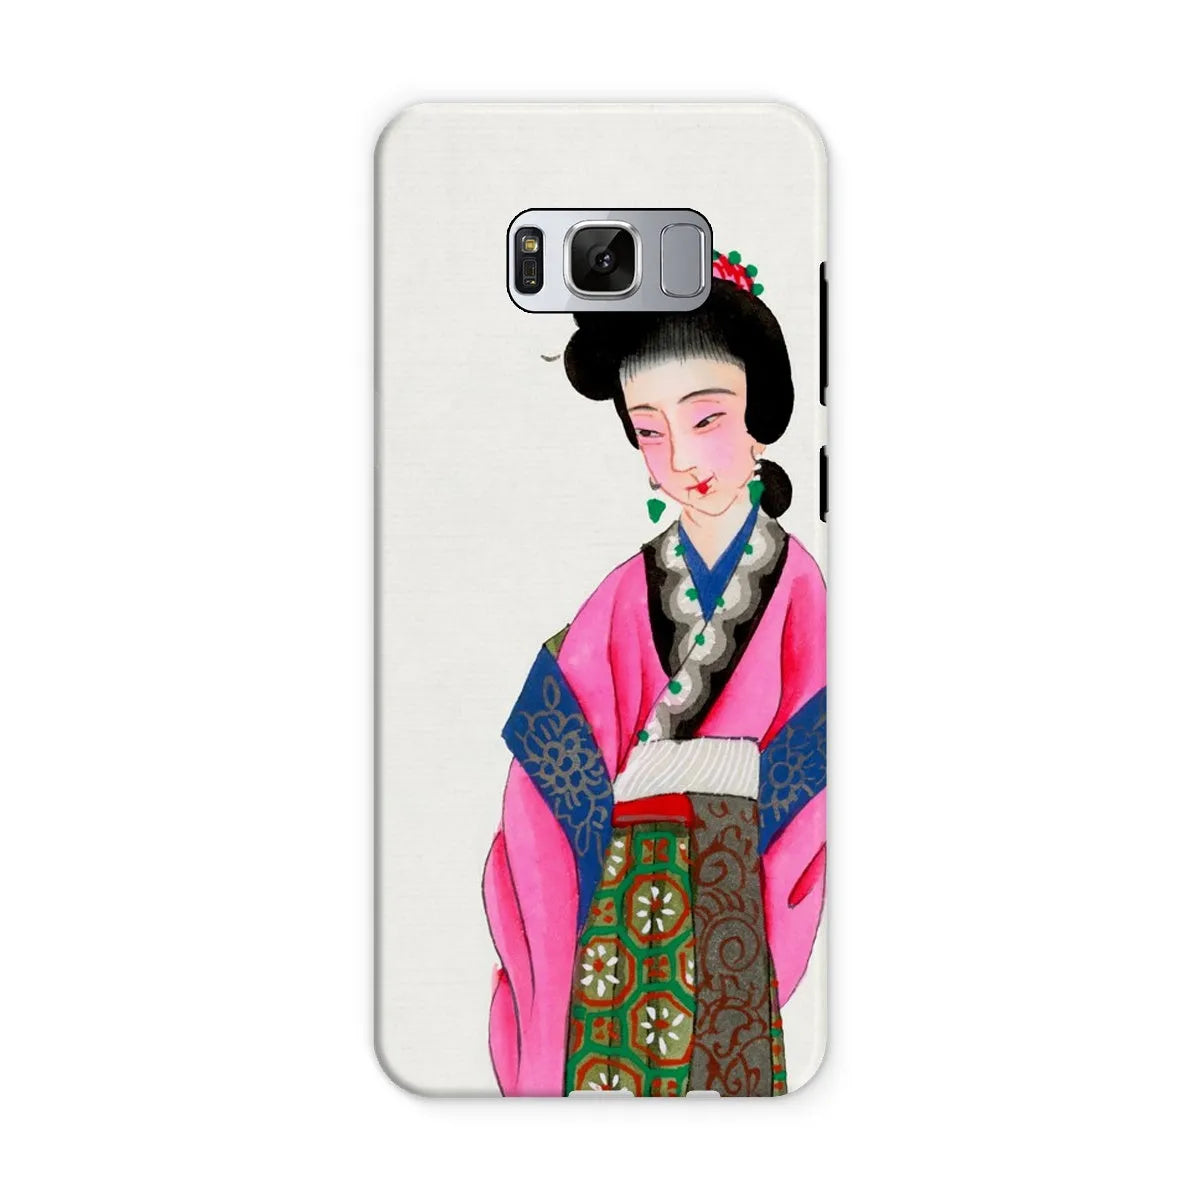 Noblewoman - Chinese Aesthetic Manchu Art Phone Case - Samsung Galaxy S8 / Matte - Mobile Phone Cases - Aesthetic Art